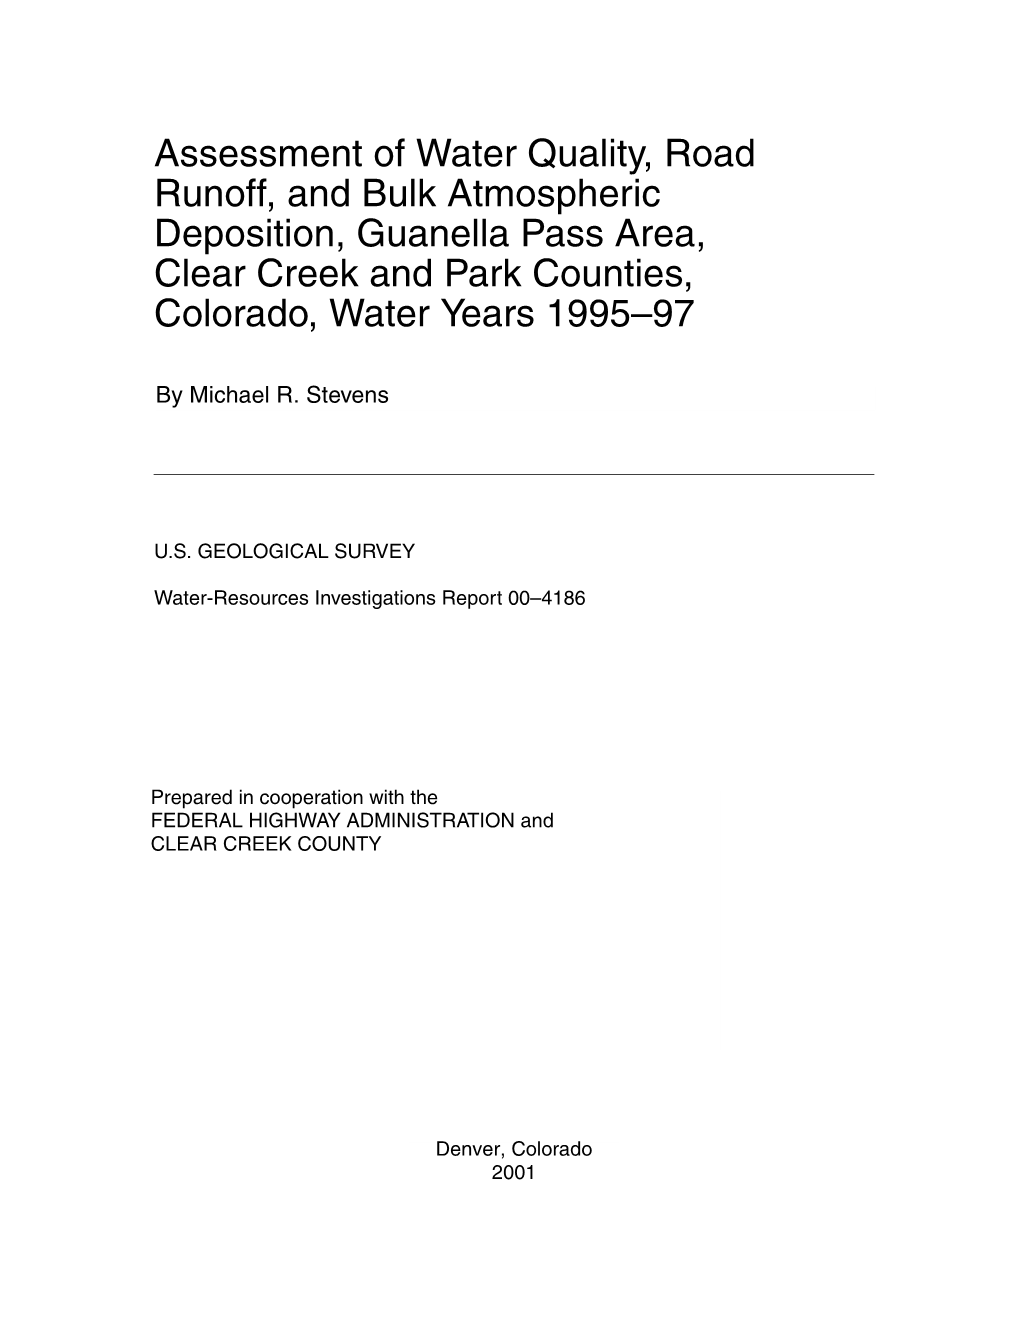 Assessment of Water Quality, Road Runoff, and Bulk Atmospheric Deposition, Guanella Pass Area, Clear Creek and Park Counties, Colorado, Water Years 1995–97